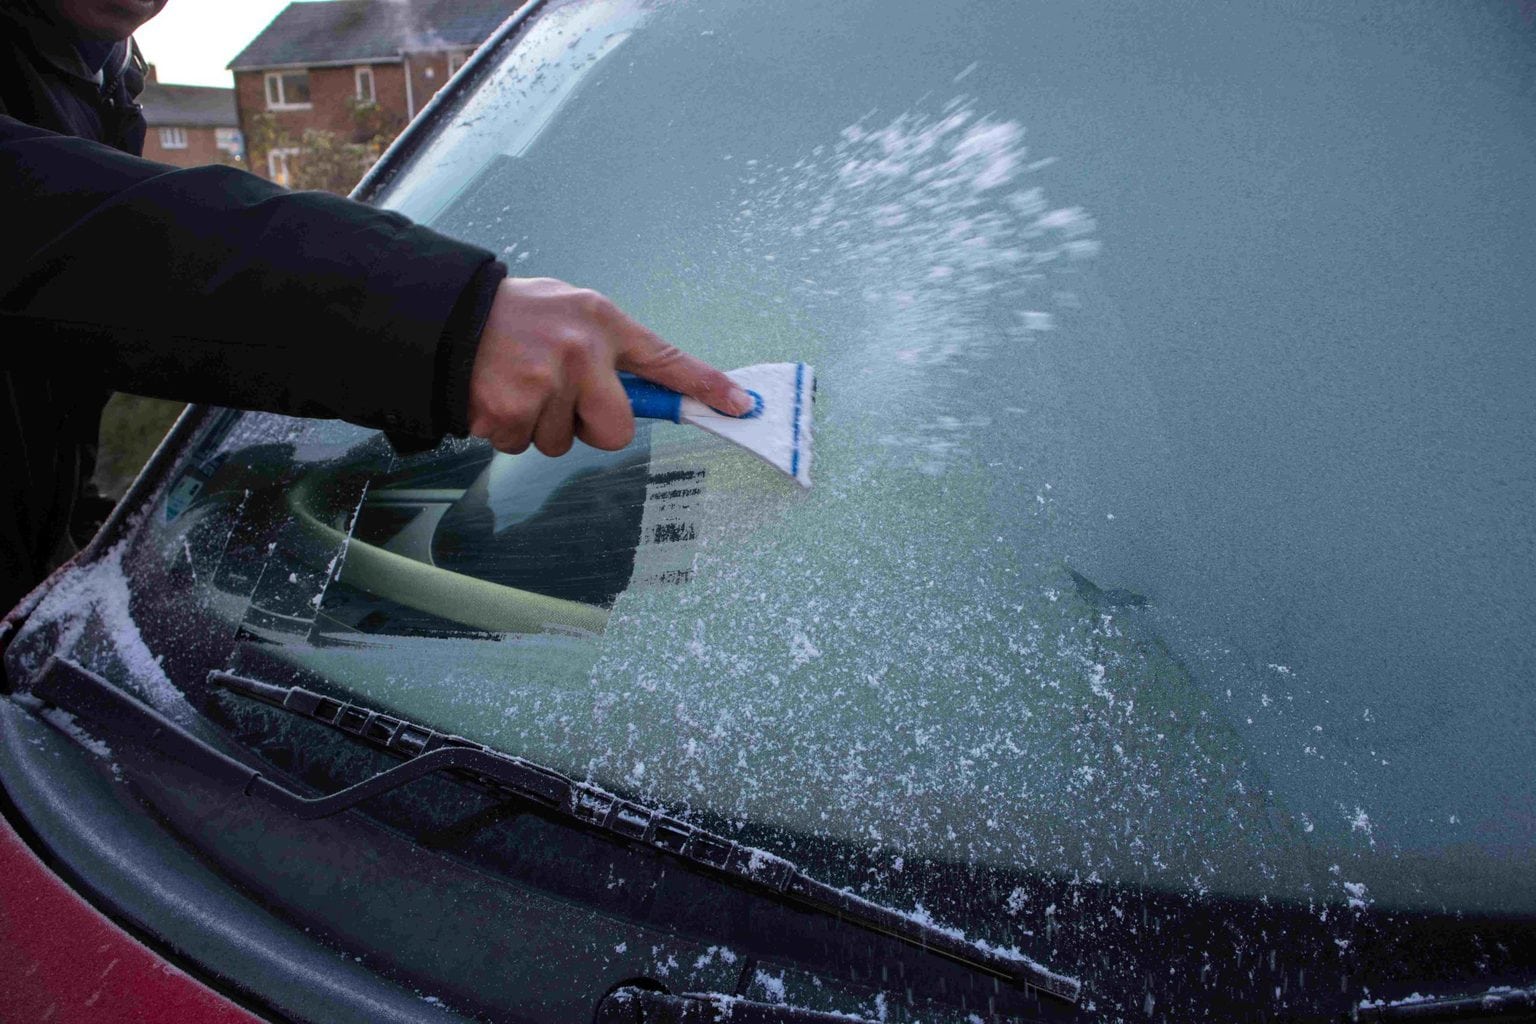 De-icing the windscreen of a car. This is an important winter driving safety tip for employees.